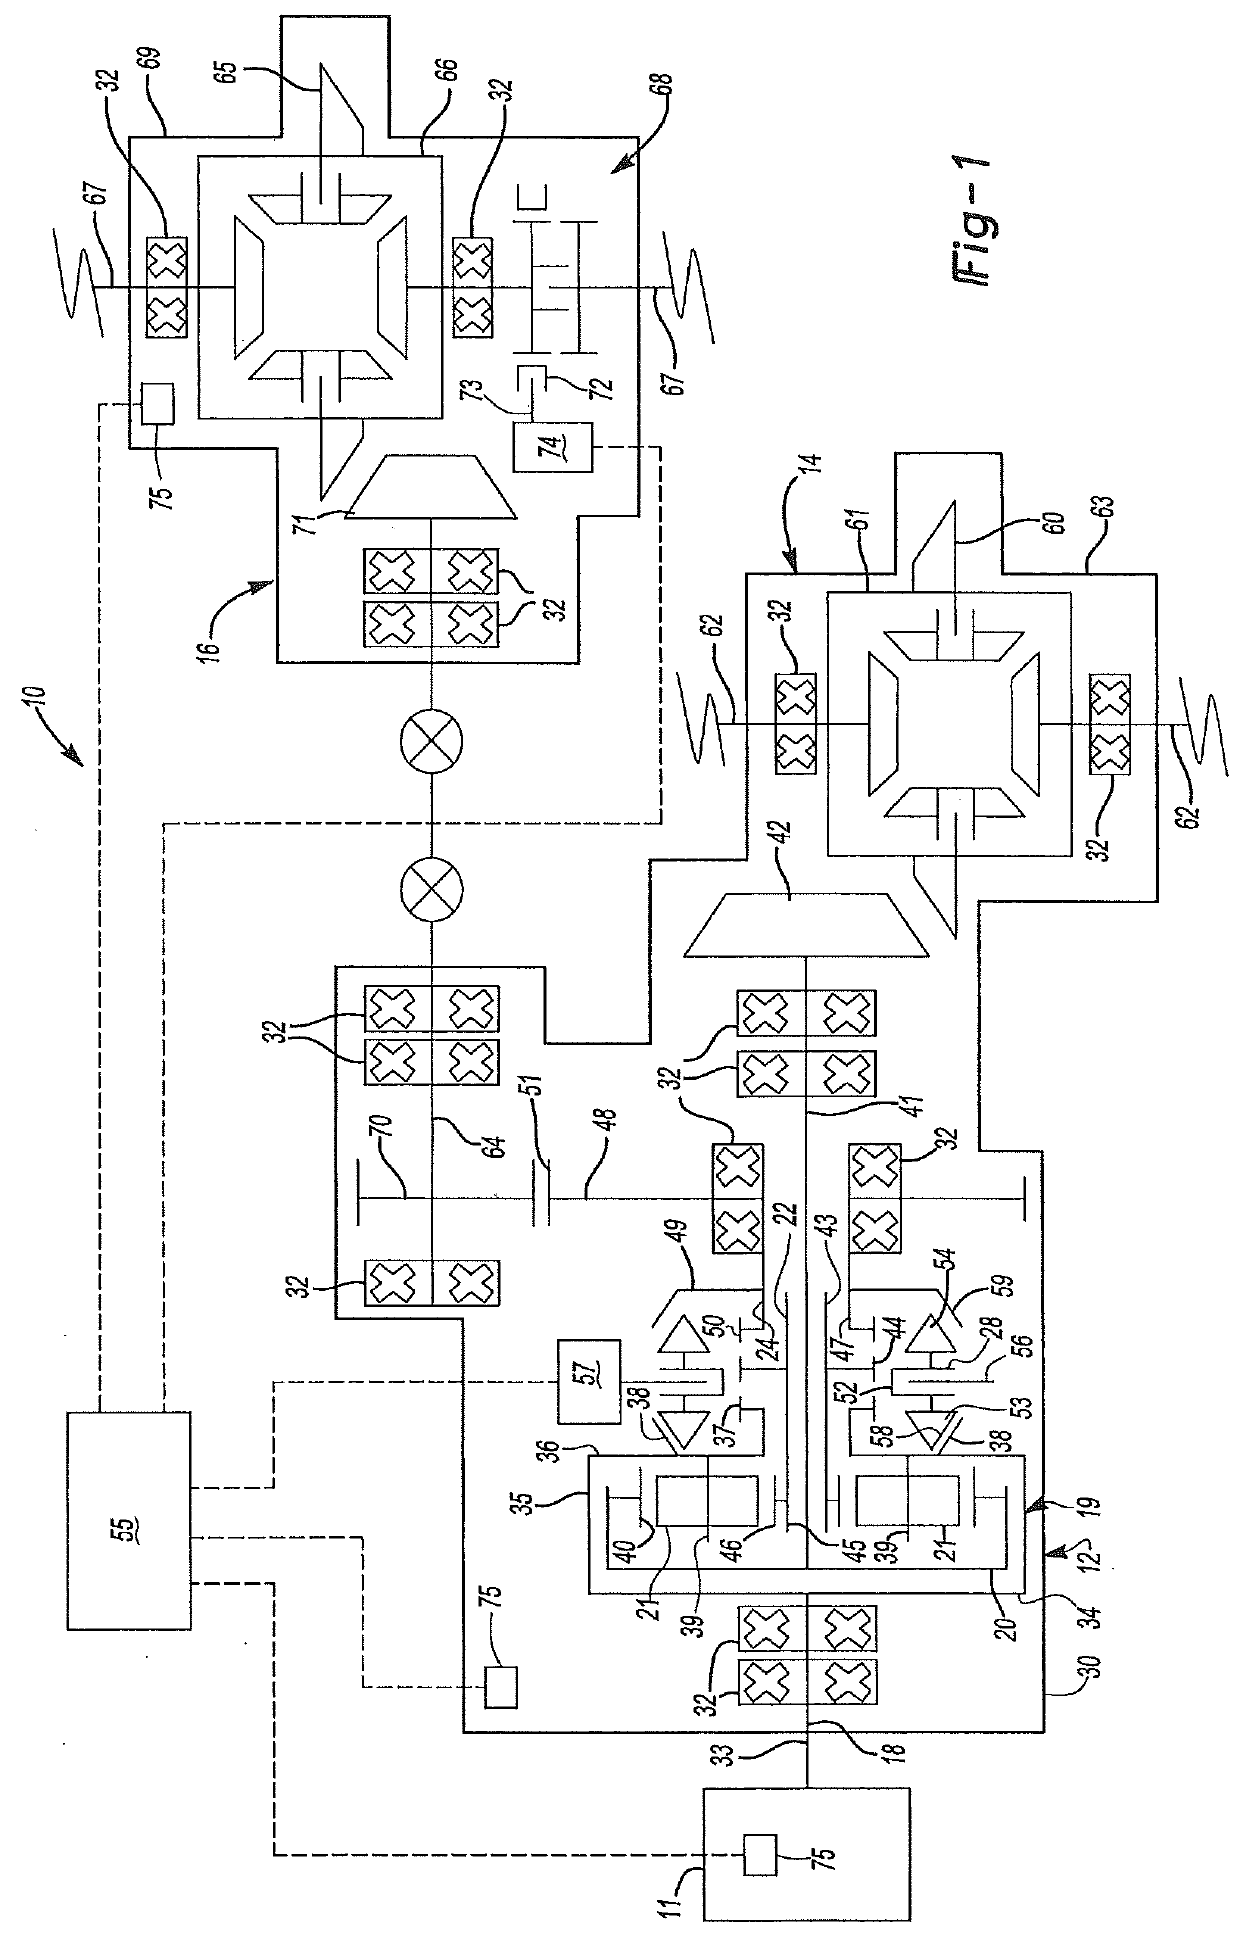 Multi-mode tandem axle function selection apparatus and method